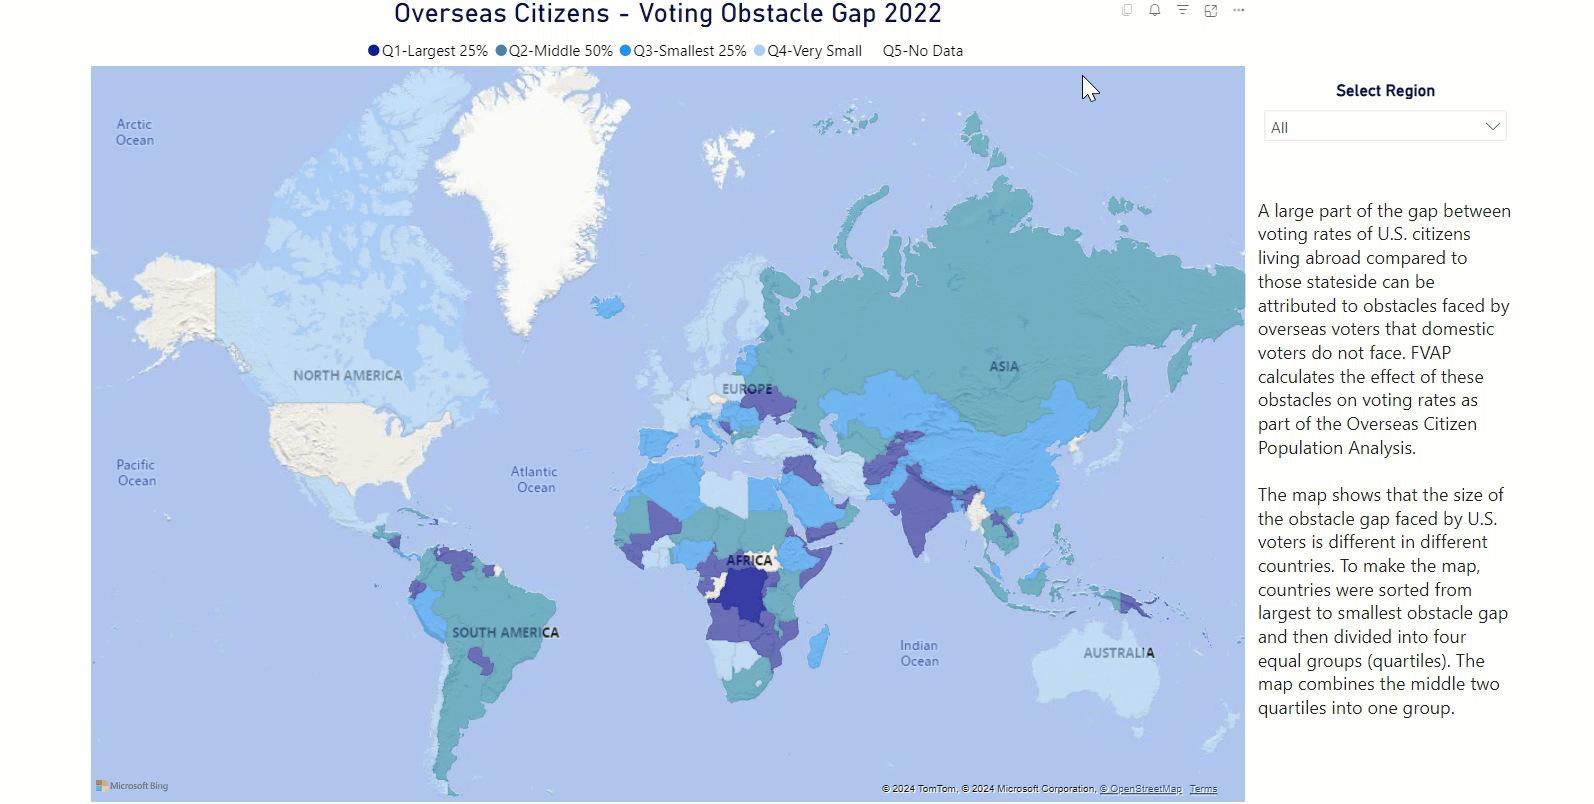 Image Overseas Citizens Voting Obstacle Gap